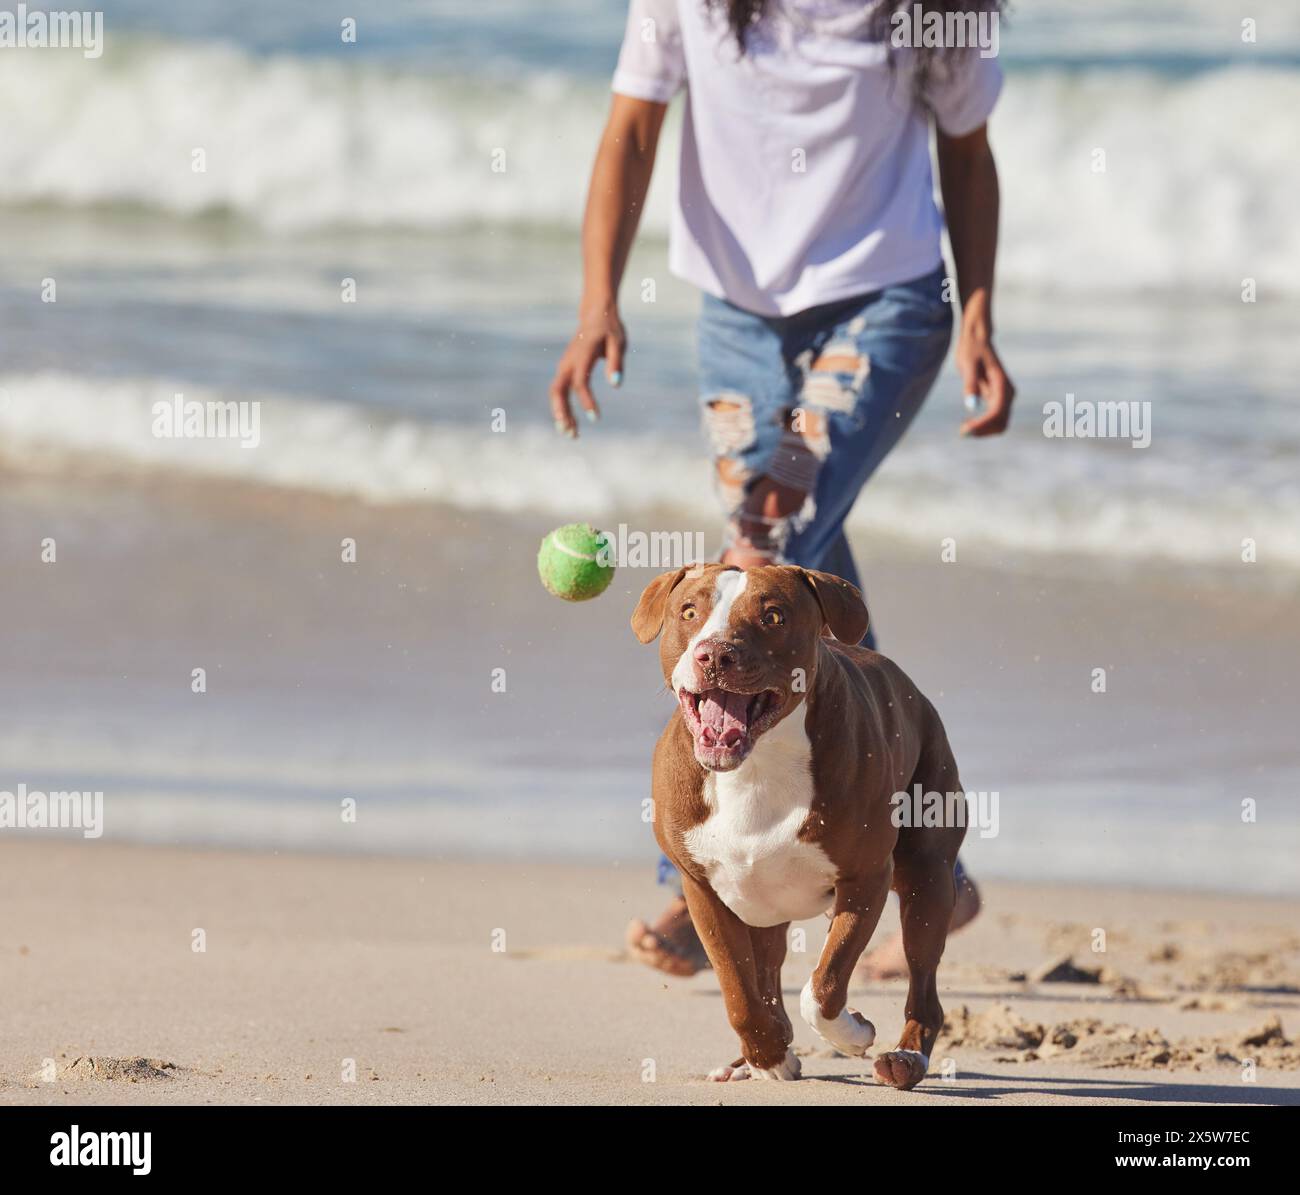 Beach, person and dog running with ball for fun exercise, healthy energy or happy animal in nature. Ocean, games and playful pitbull with outdoor Stock Photo